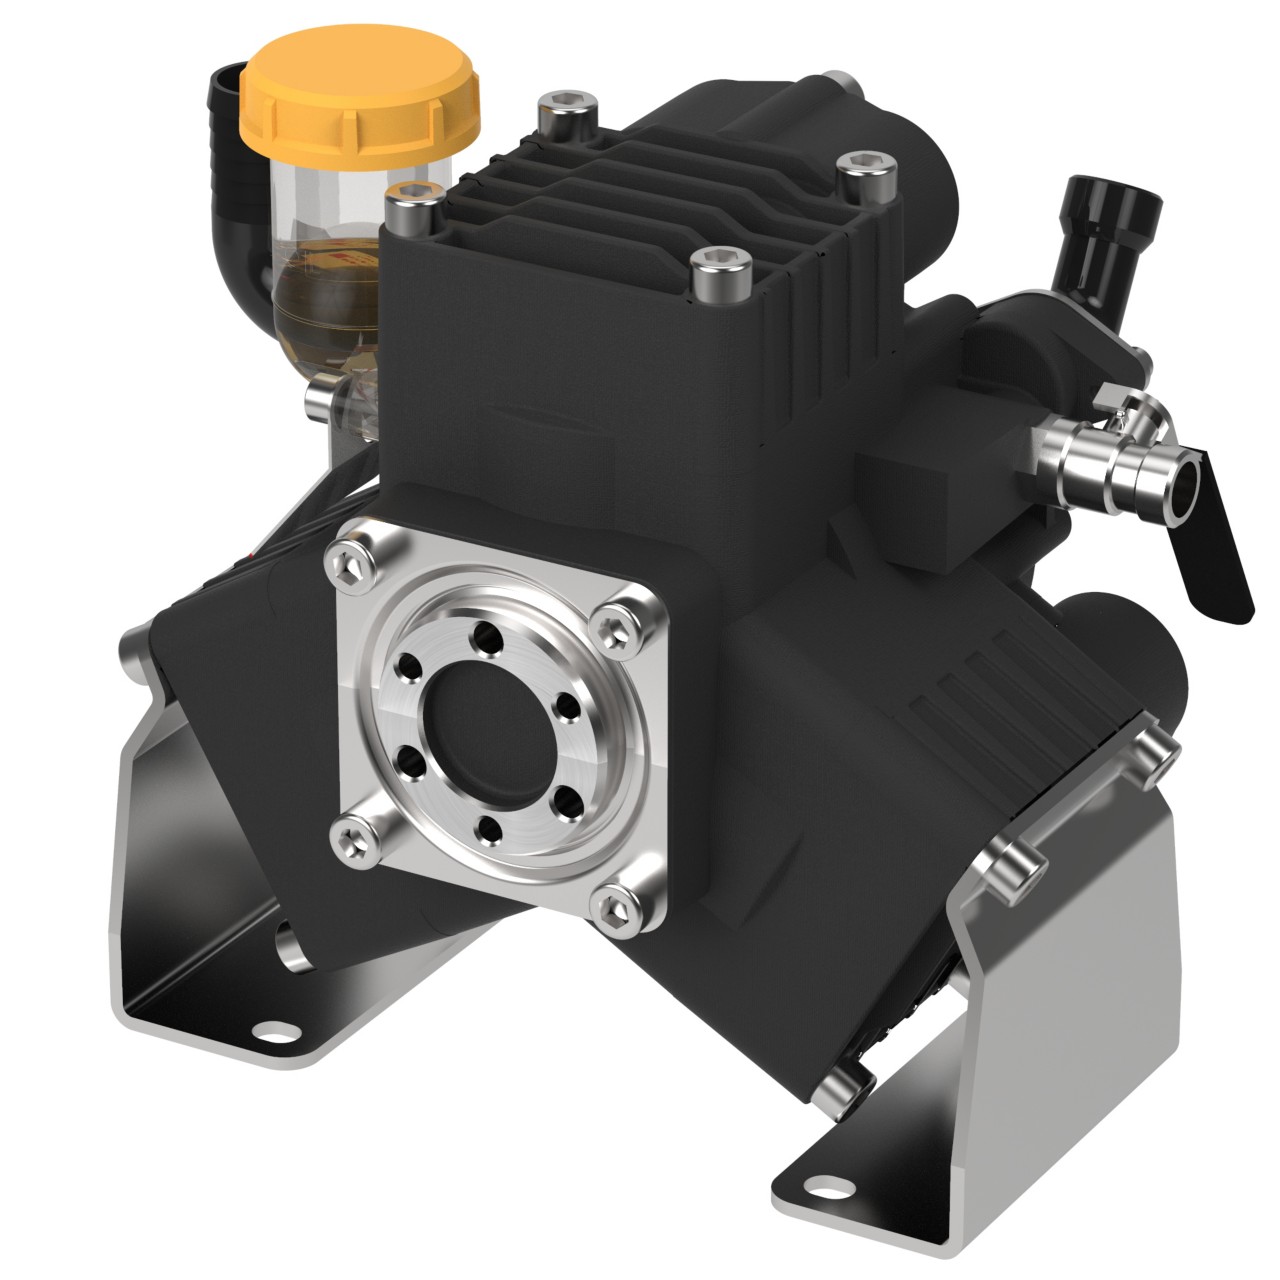 Picture of Diaphragm Pump ONLY, Medium Pressure, Aluminum Body, Flanged, 13.5 GPM, 580 PSI, 550 RPM, No Shaft, 1-3/8" Inlet, 3/4" Outlet, 5.5 HP